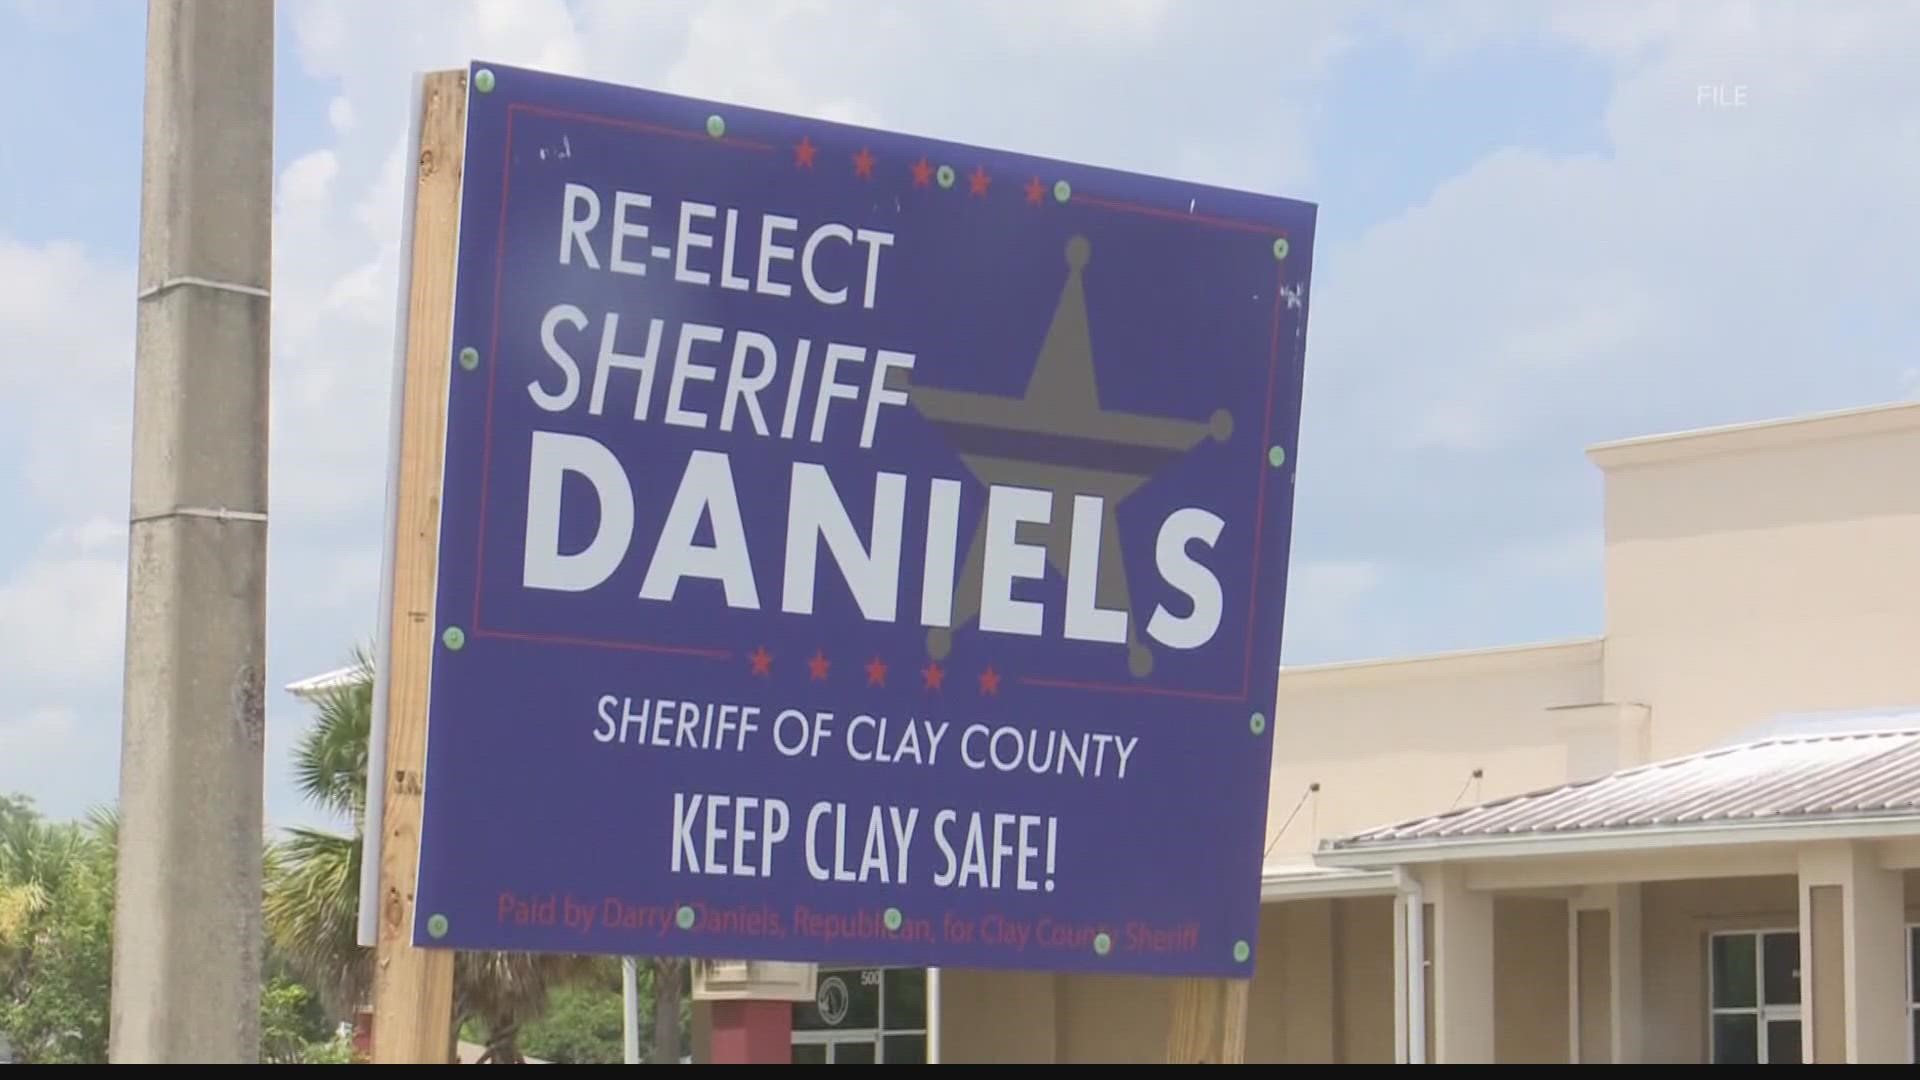 Jury selection begins this morning in the trial of former Clay County Sheriff Darryl Daniels.